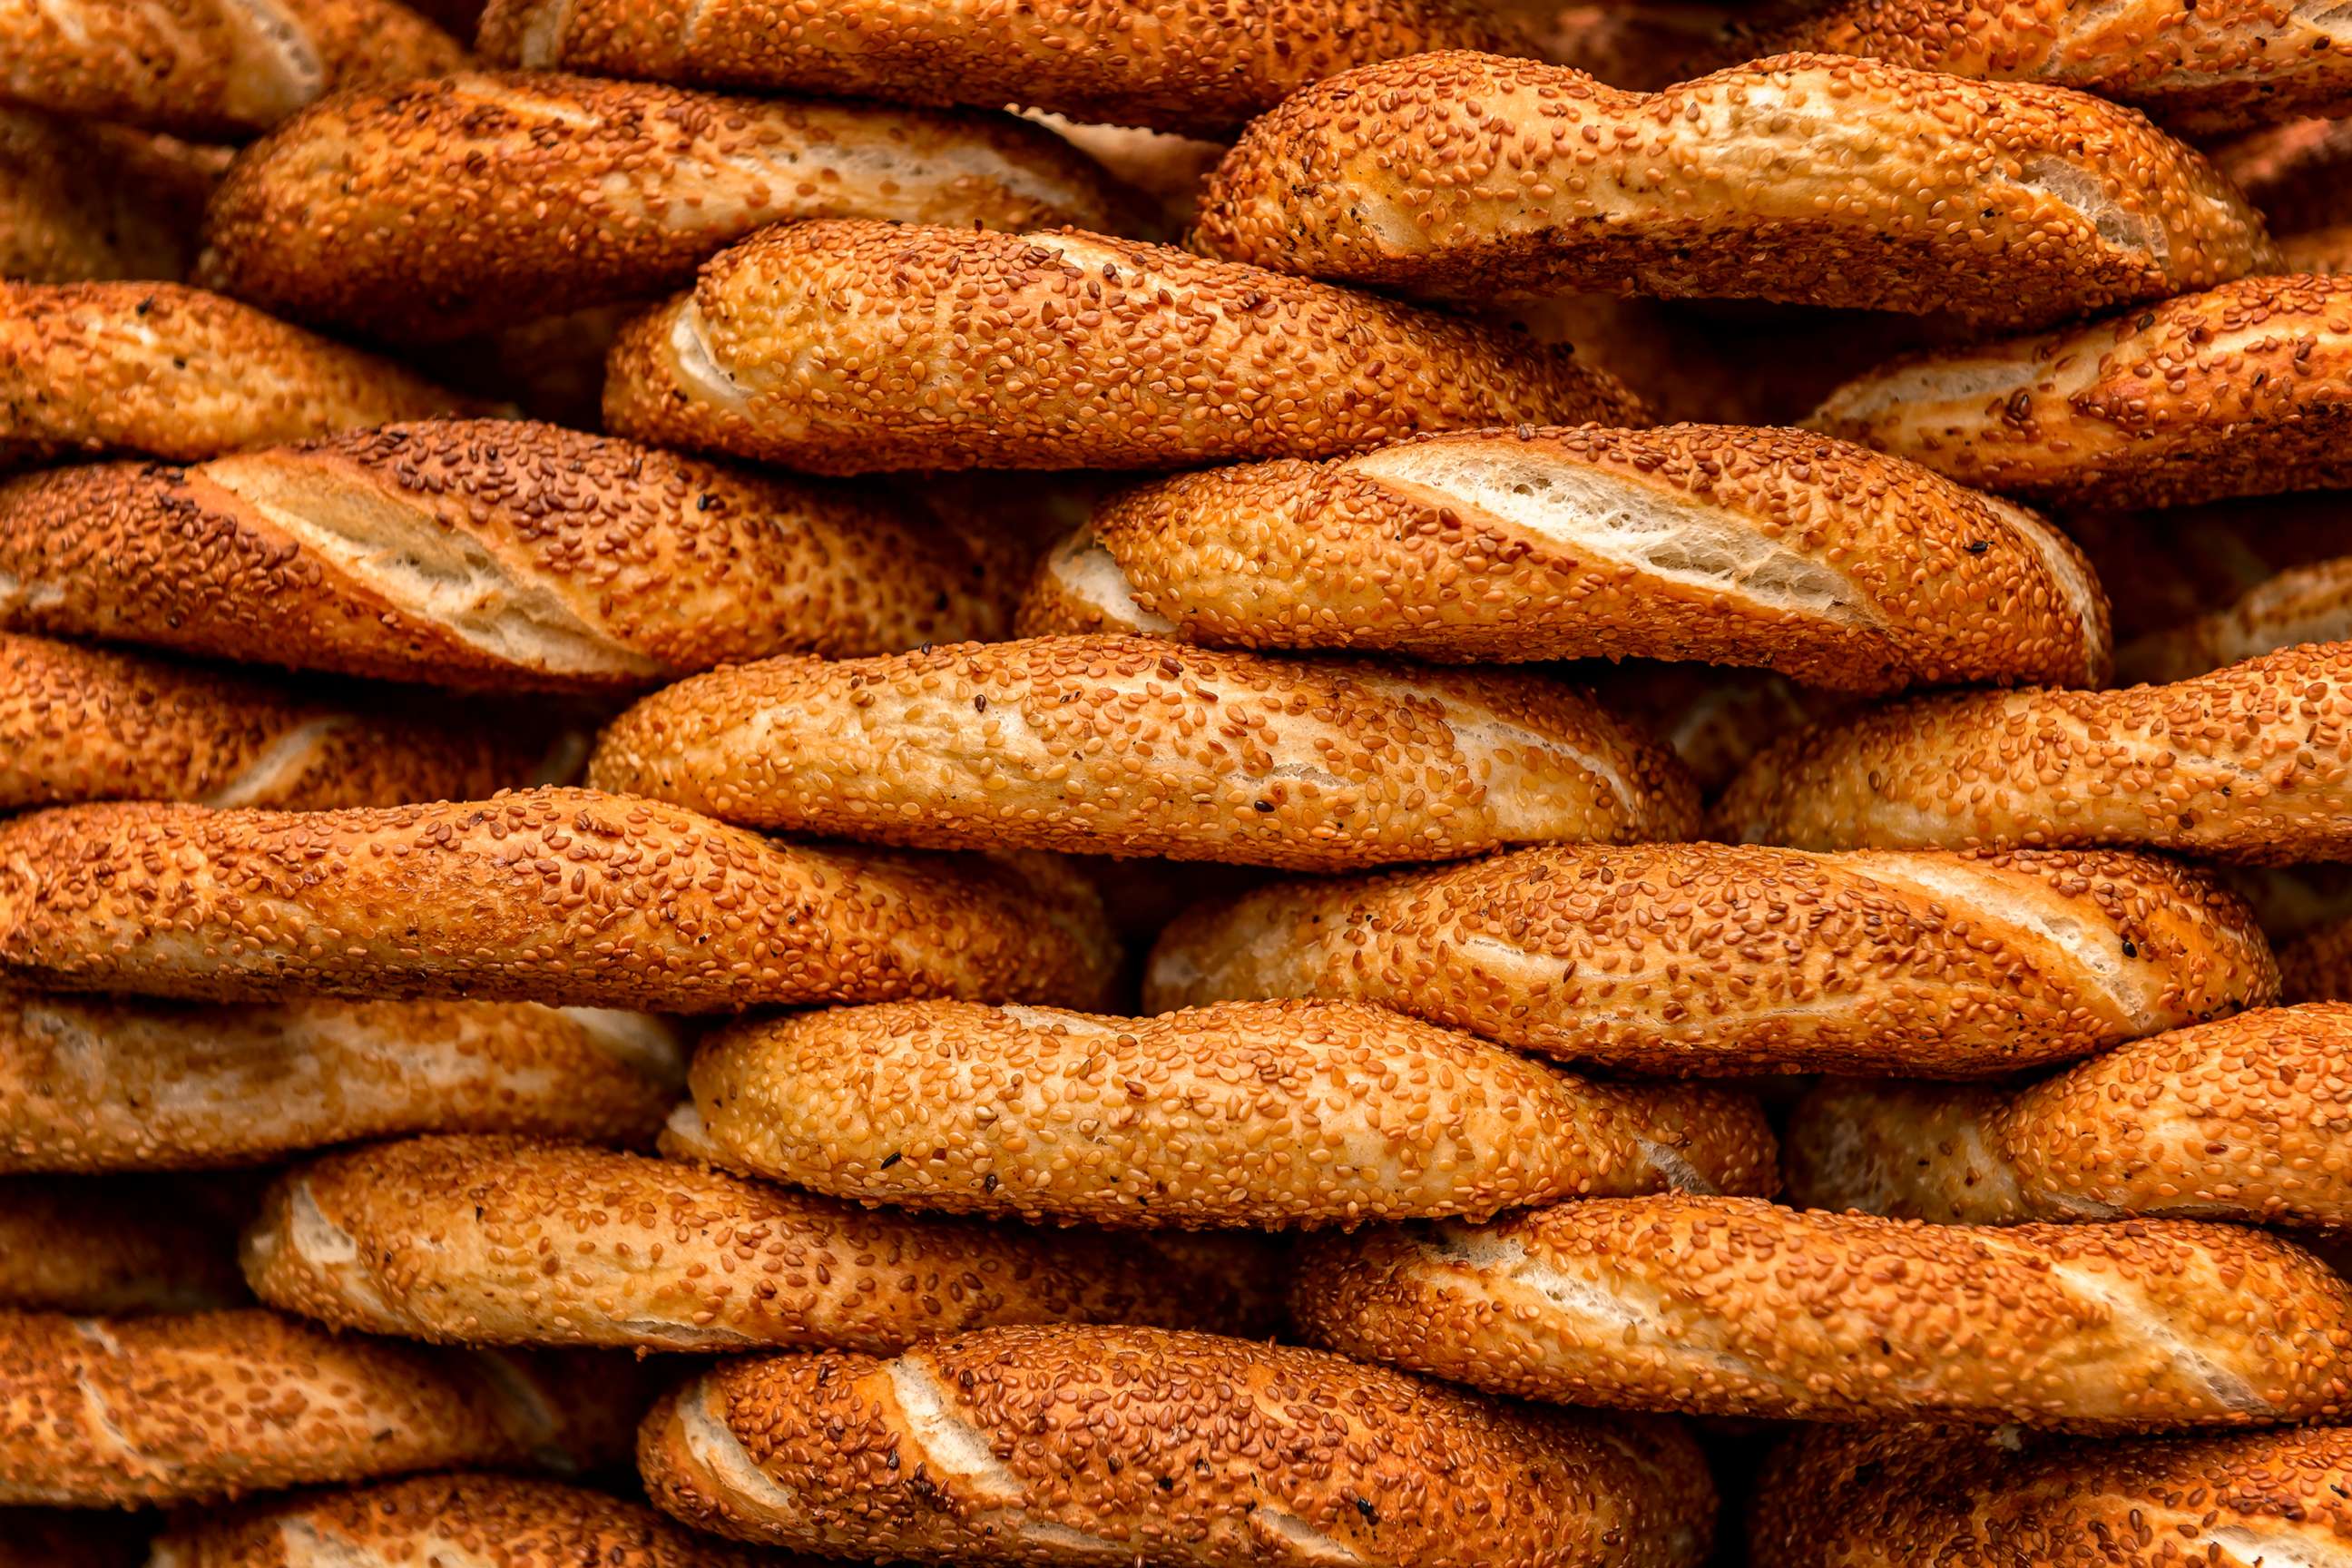 PHOTO: Simit is the most popular street food in Istanbul, Turkey. It is a circular bread decorated with sesame seeds.